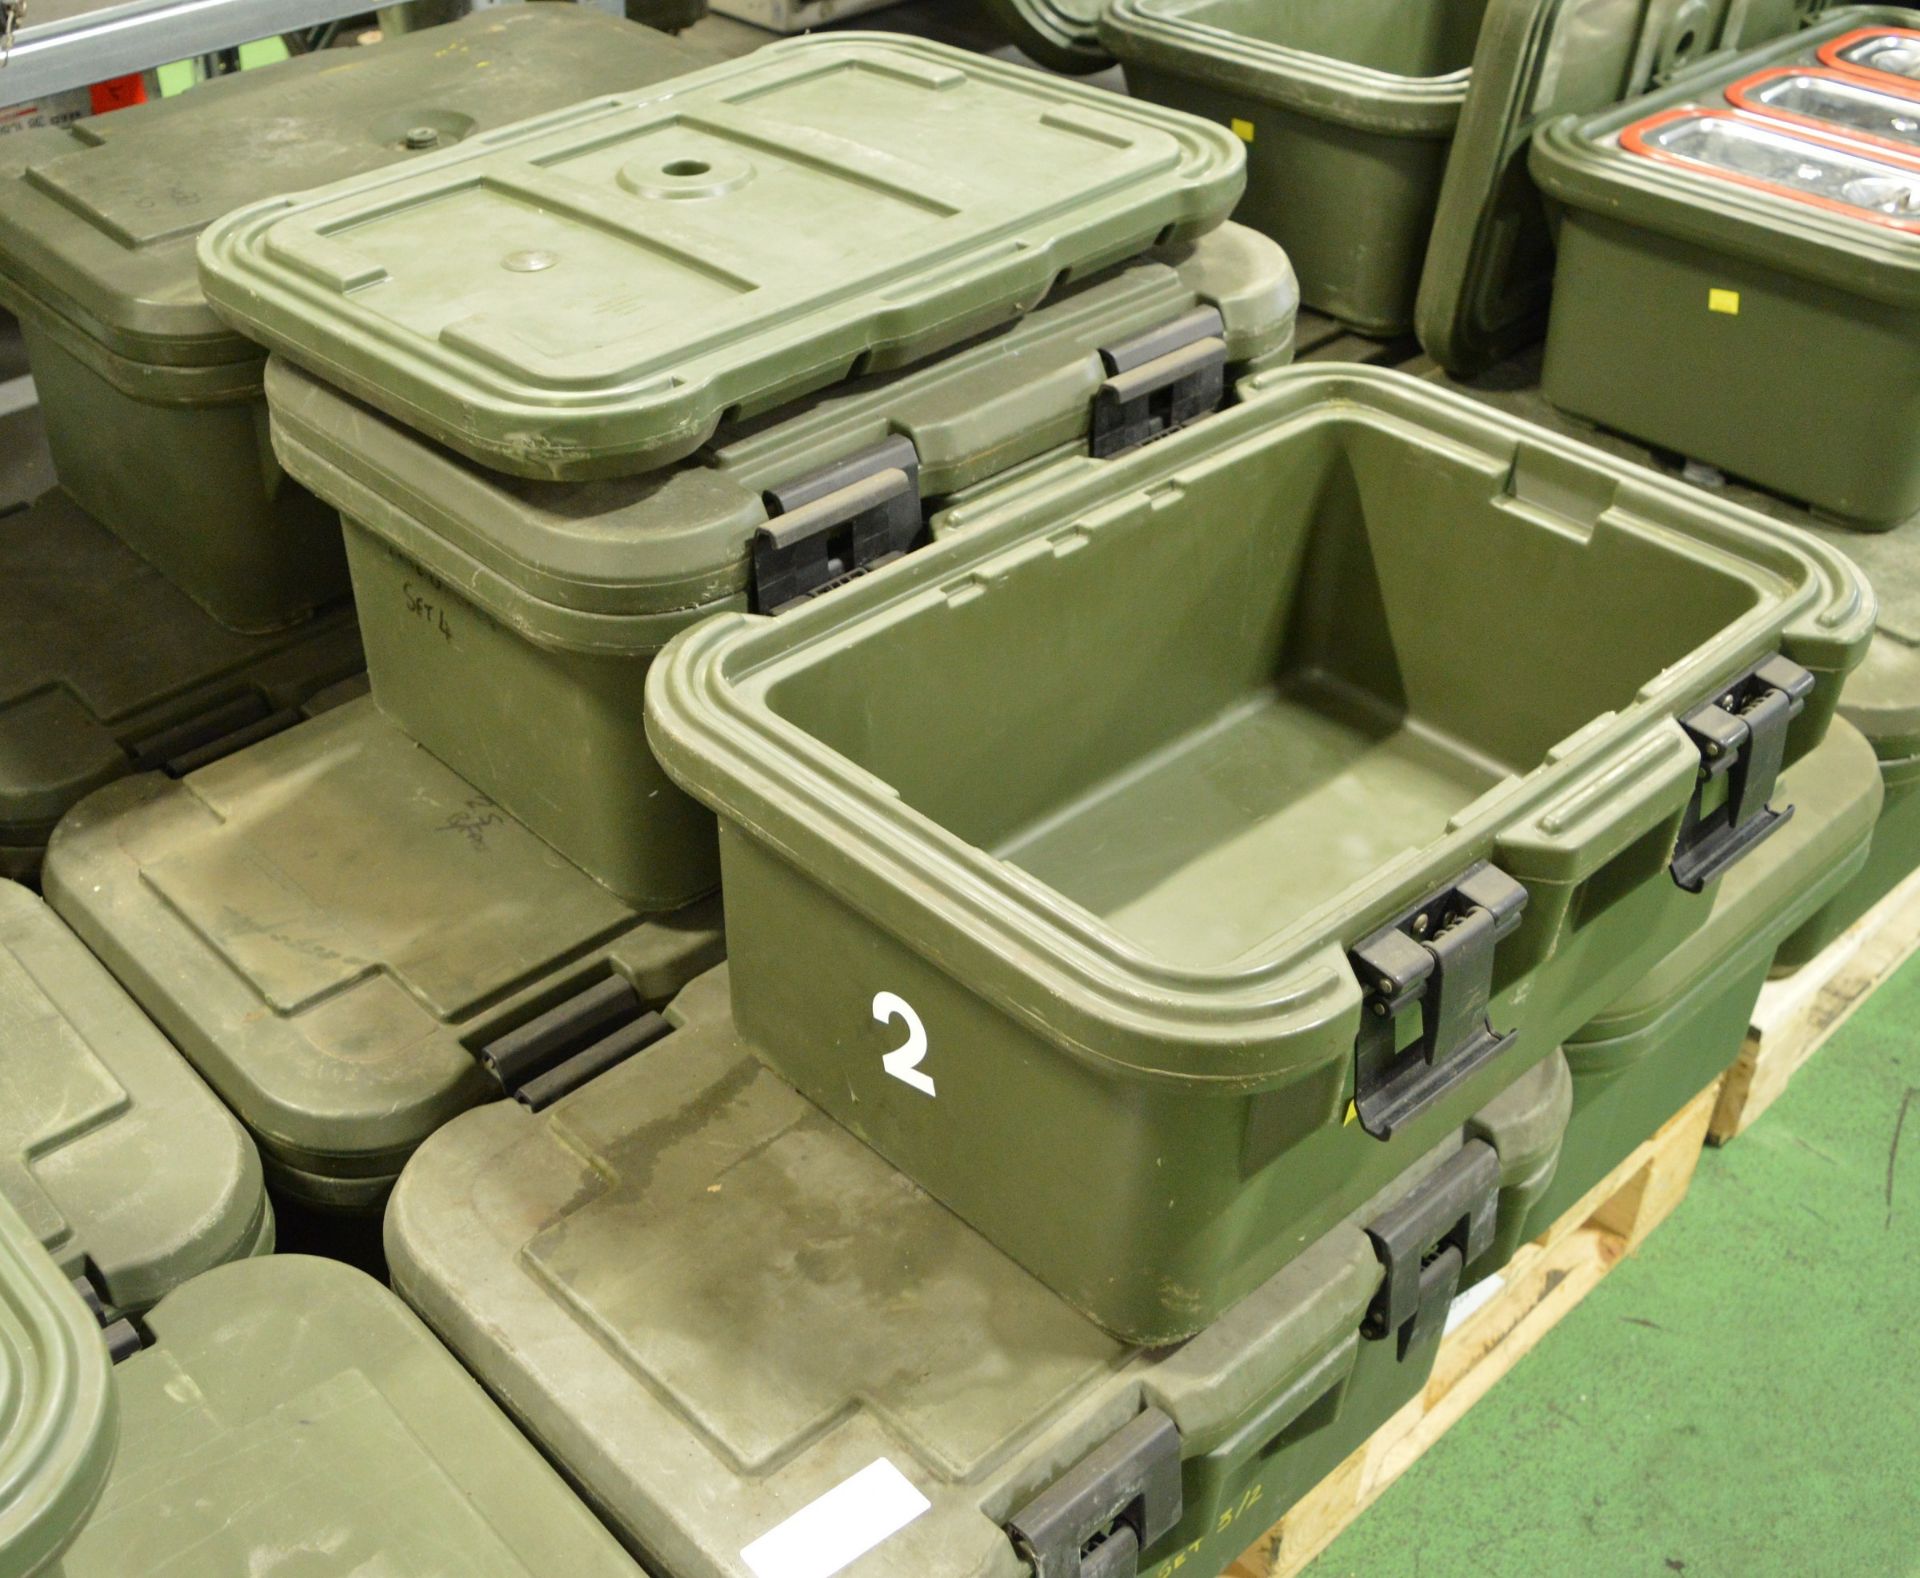 8x Cambro Green Plastic Food Containers L650 x W440 x H310mm - Image 2 of 2